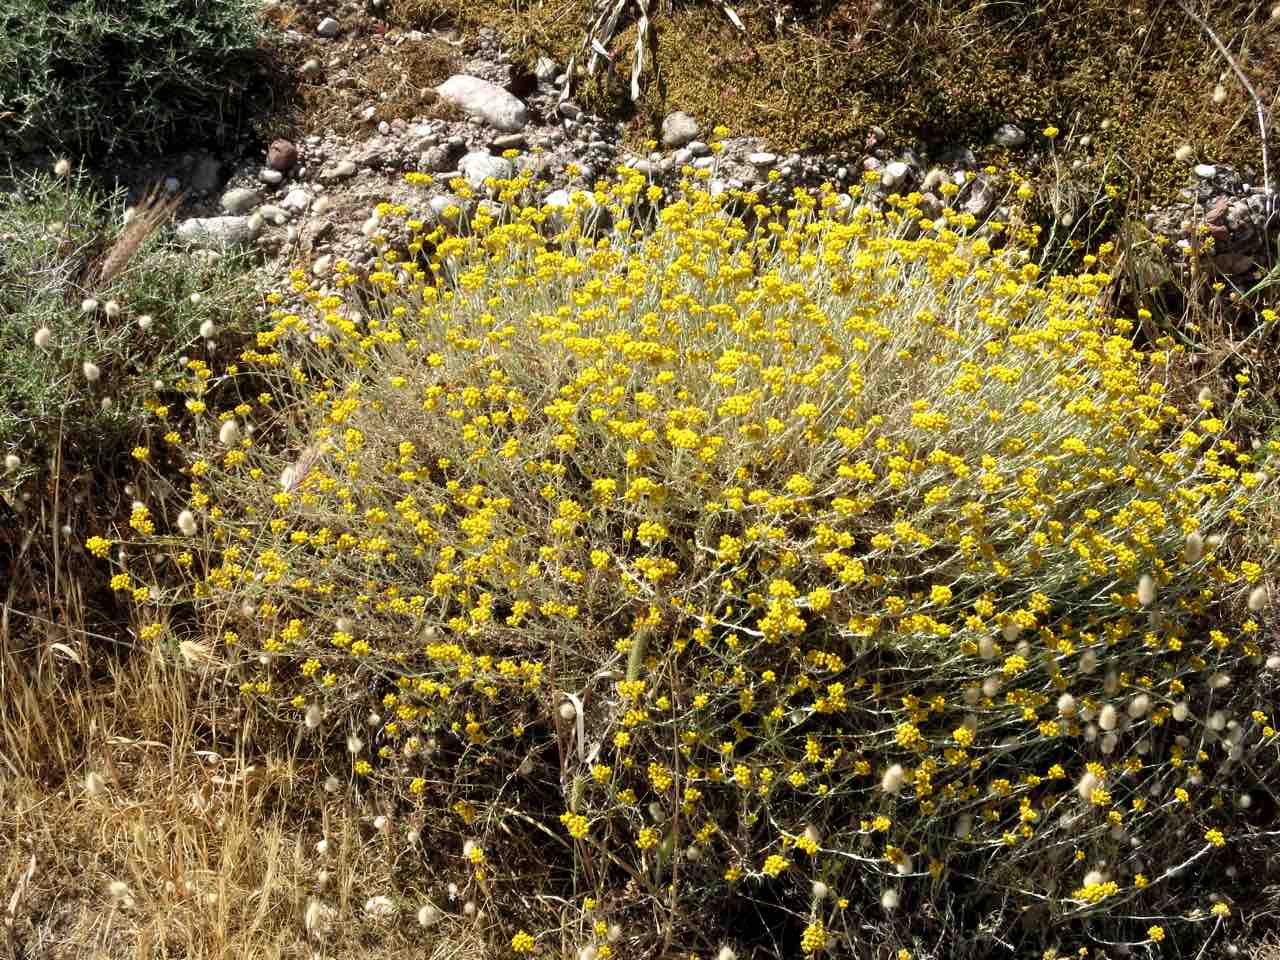 Wild Herbs Of Crete In Sitia Region, Use In Medicine & Gastronomy, wild herbs history tour, activity sitia crete, activities crete, indigenous herbs workshop tour, Petassos - Travellers with a purpose, alternative activities crete, things to do crete, nature and herbs